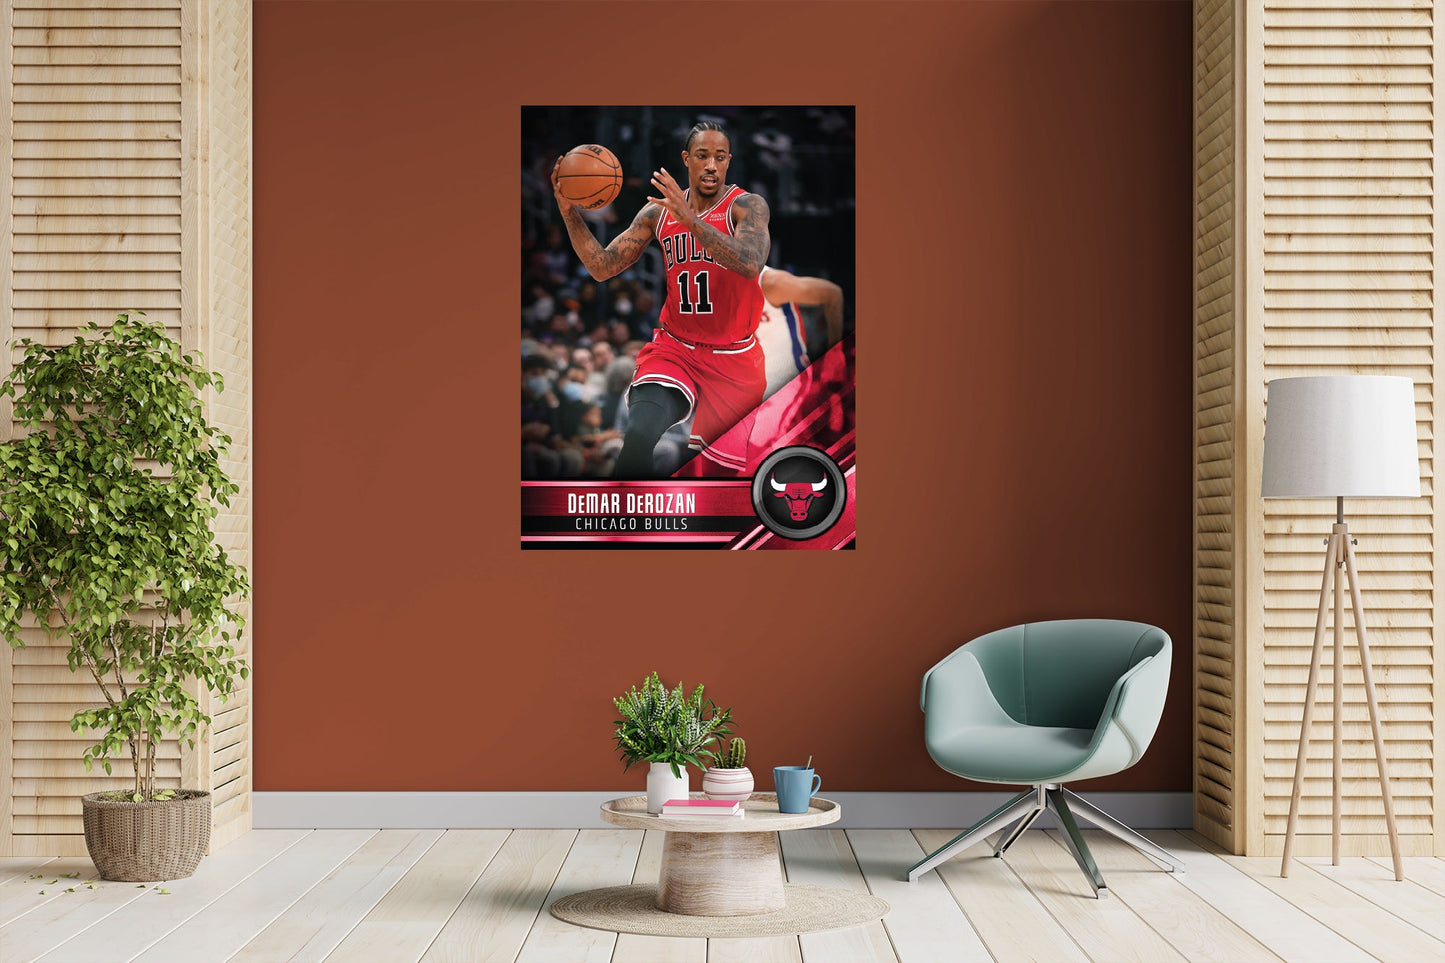 Chicago Bulls: DeMar DeRozan Poster - Officially Licensed NBA Removable Adhesive Decal